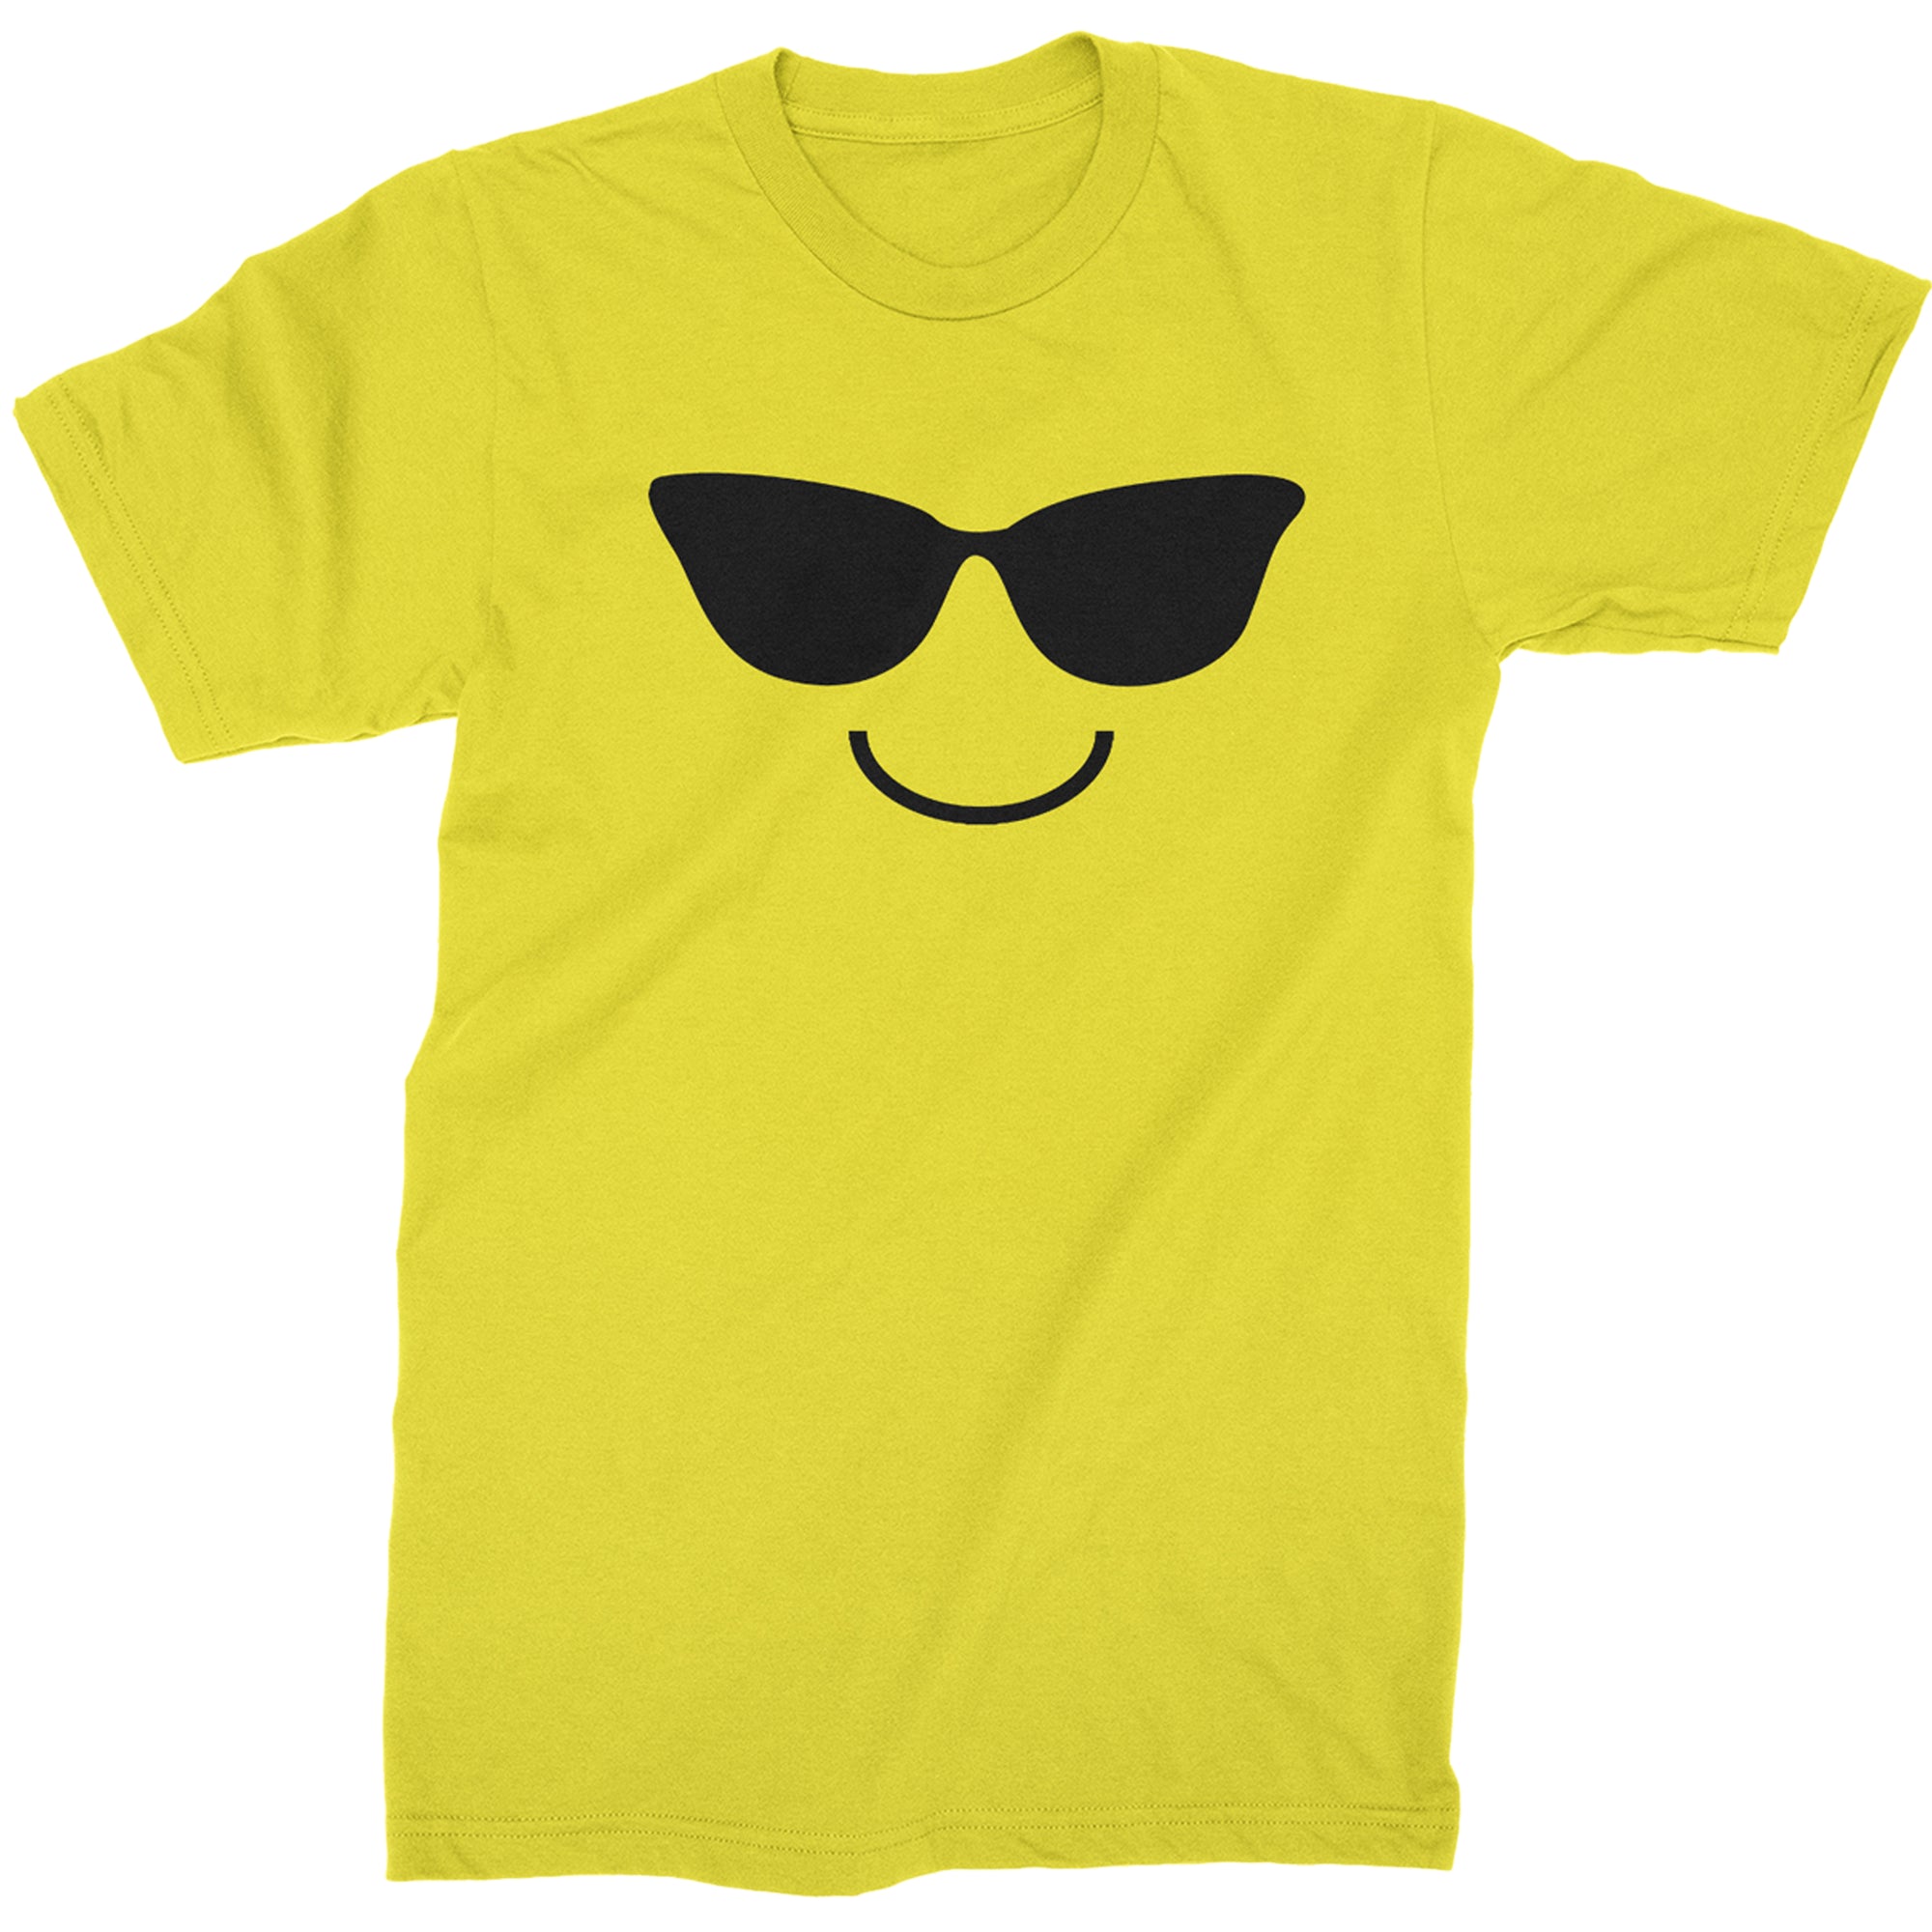 Womens Emoji Smile Face Emoticon T-shirt Collection Halloween Costume #expressiontees, emiley, emoji, emoji clothing, emoji shirt, emoji t-shirt, emoji tee, emoji tshirt, emoji tshirts, emoticon, emoticon shirt, halloween costume by Expression Tees